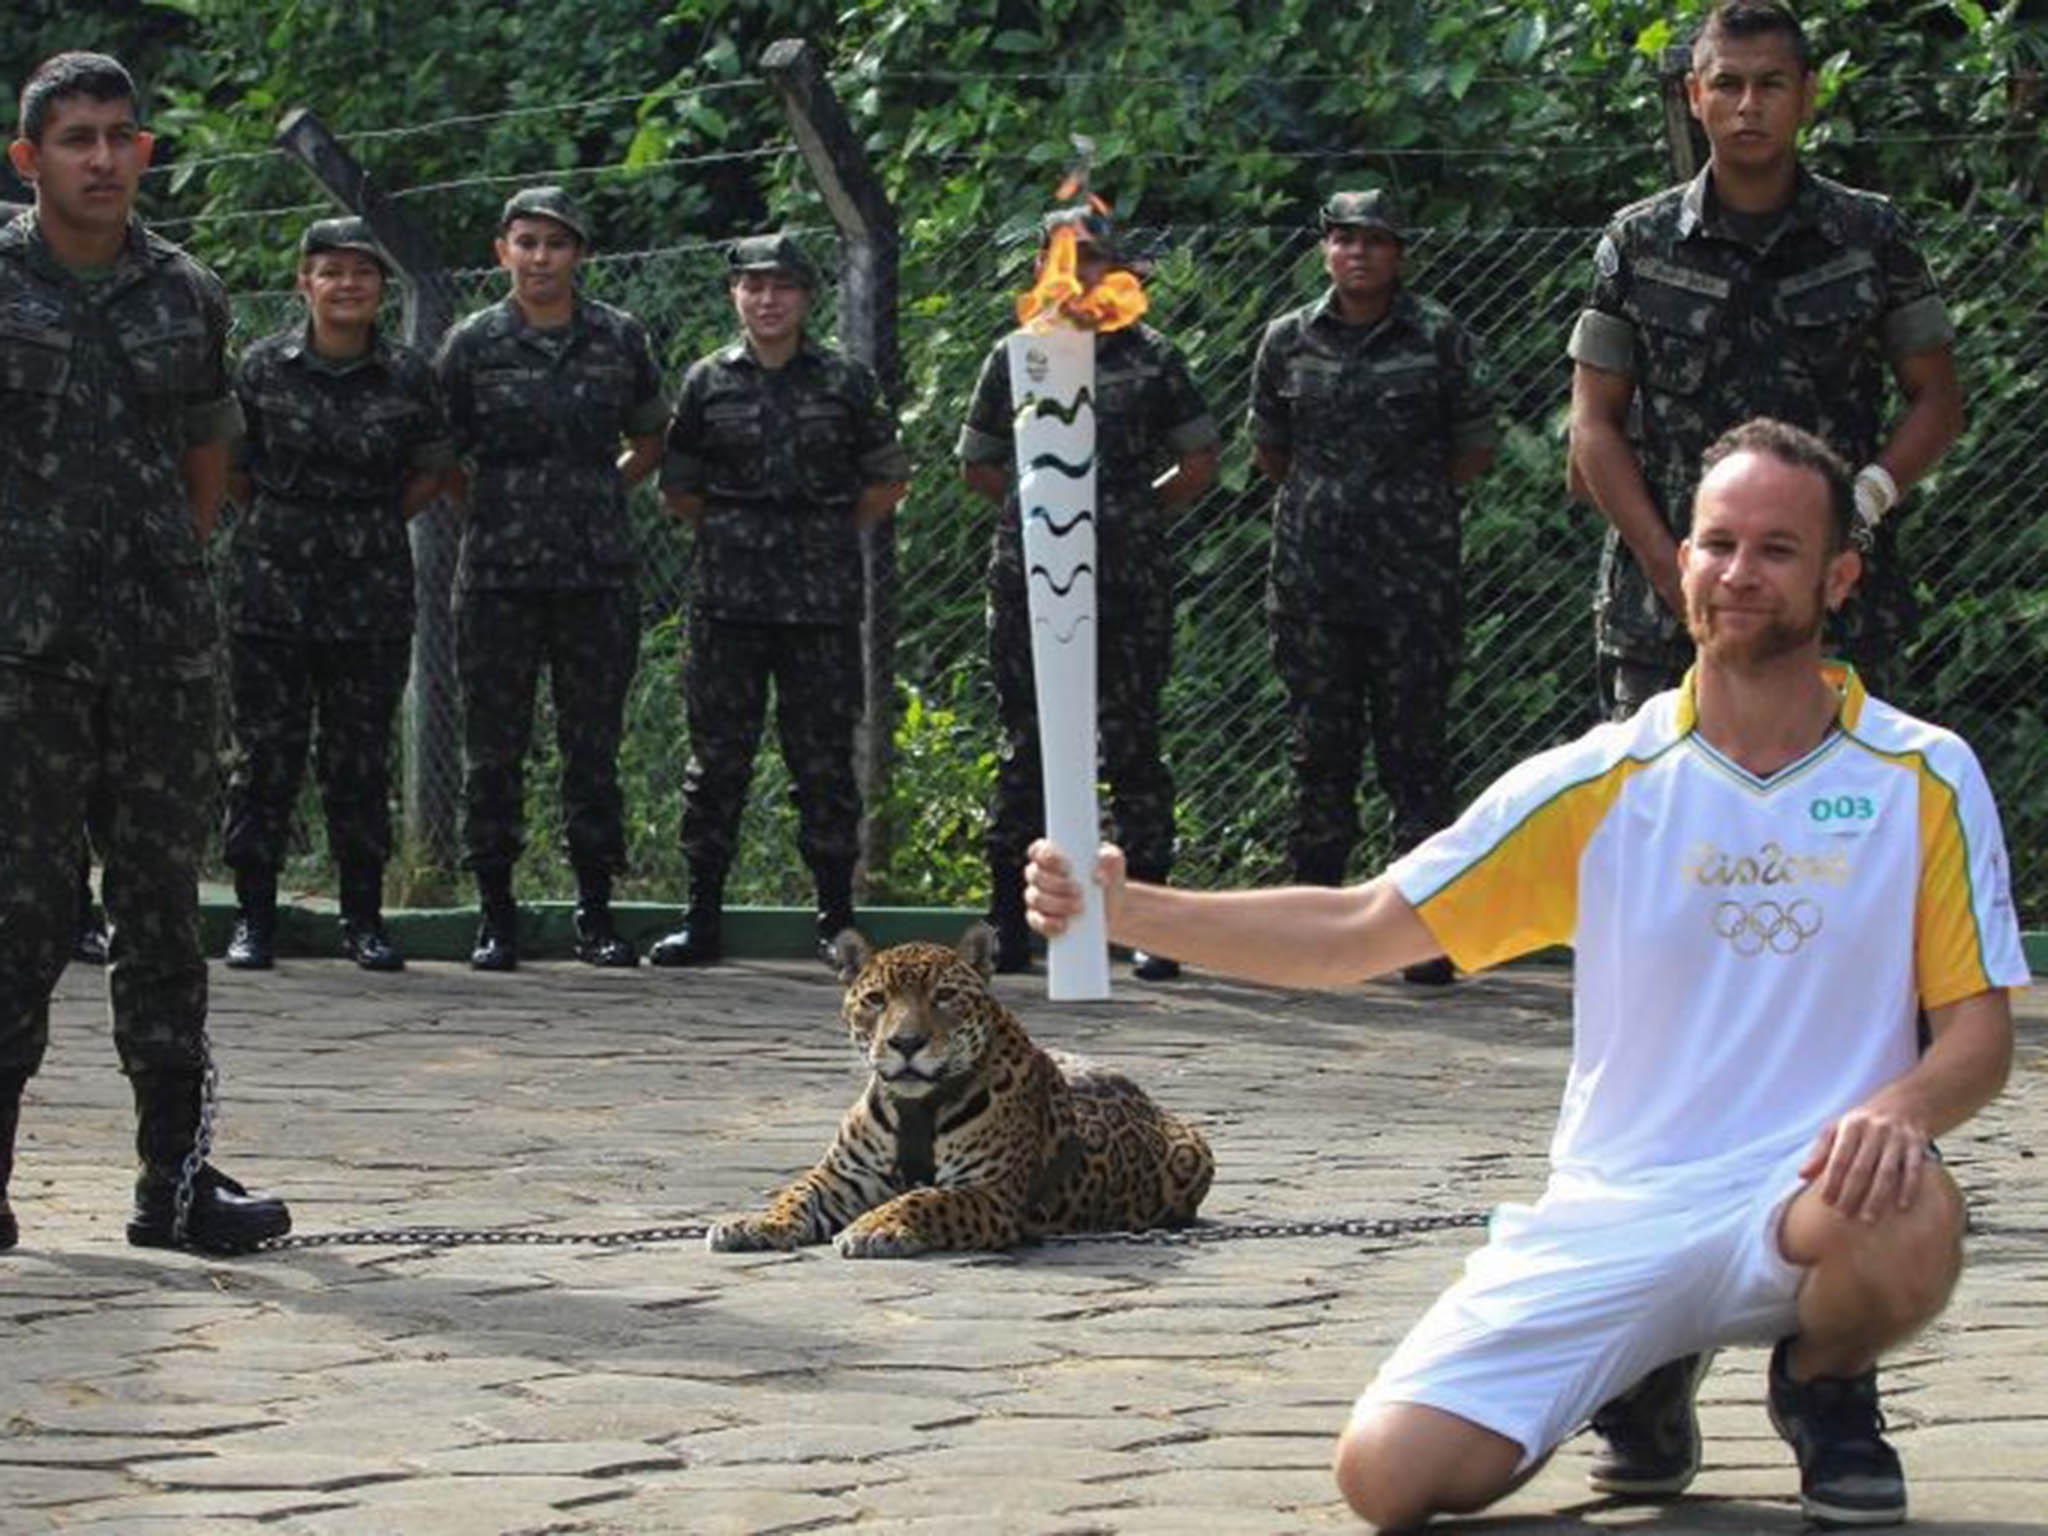 Brazilian physiotherapist Igor Simoes Andrade poses for picture next to jaguar Juma as he takes part in the Olympic Flame torch relay in Manaus, Brazil, June 20, 2016